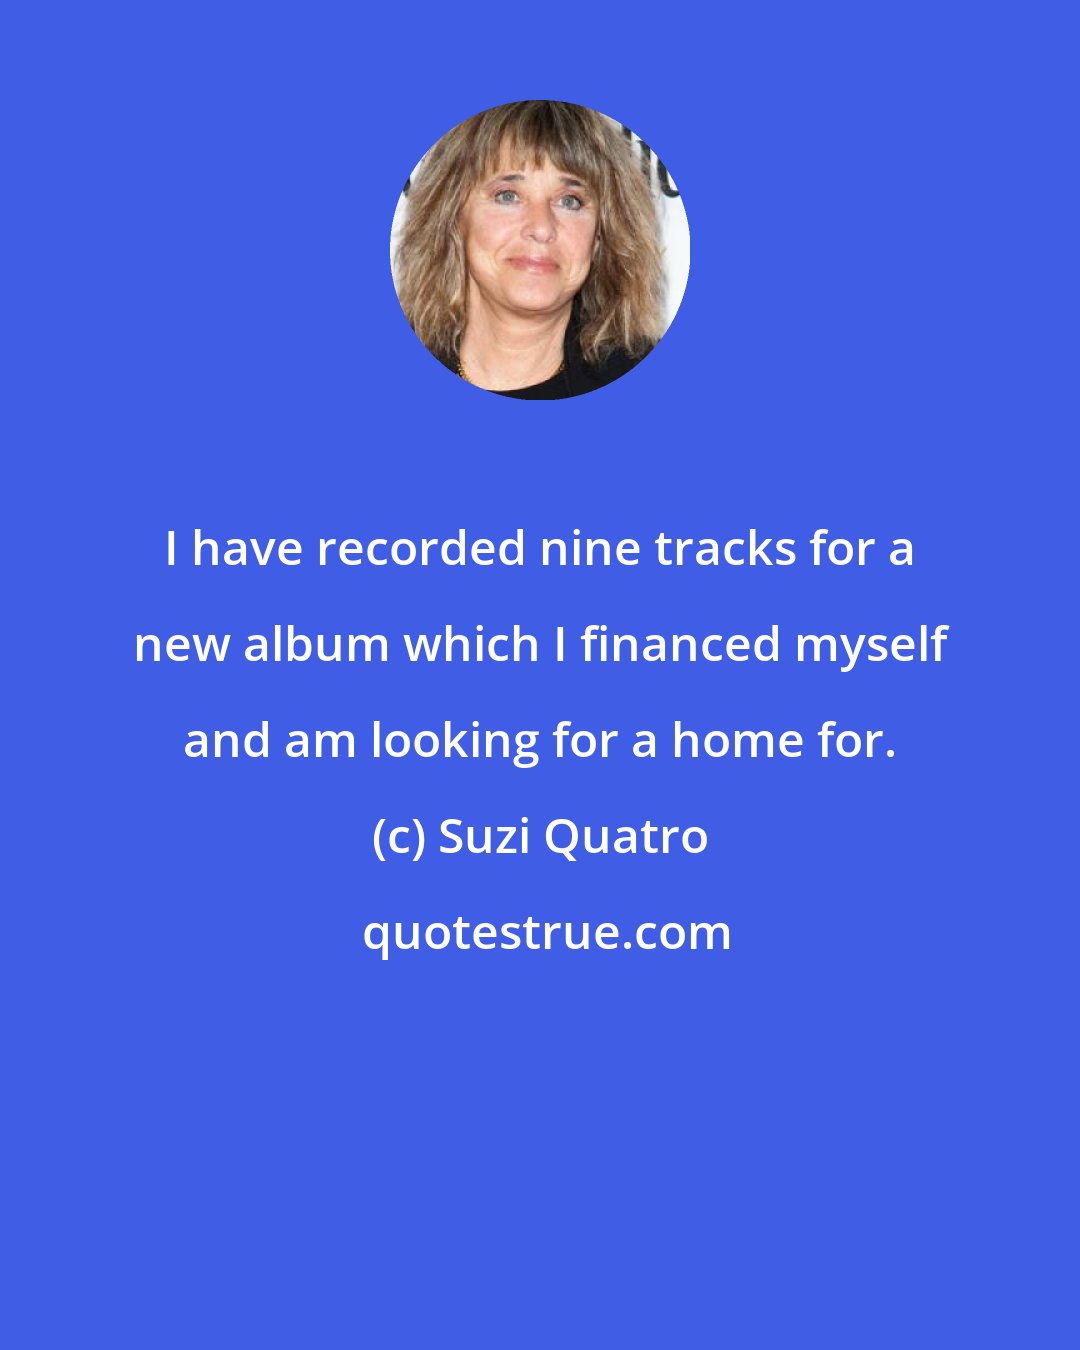 Suzi Quatro: I have recorded nine tracks for a new album which I financed myself and am looking for a home for.